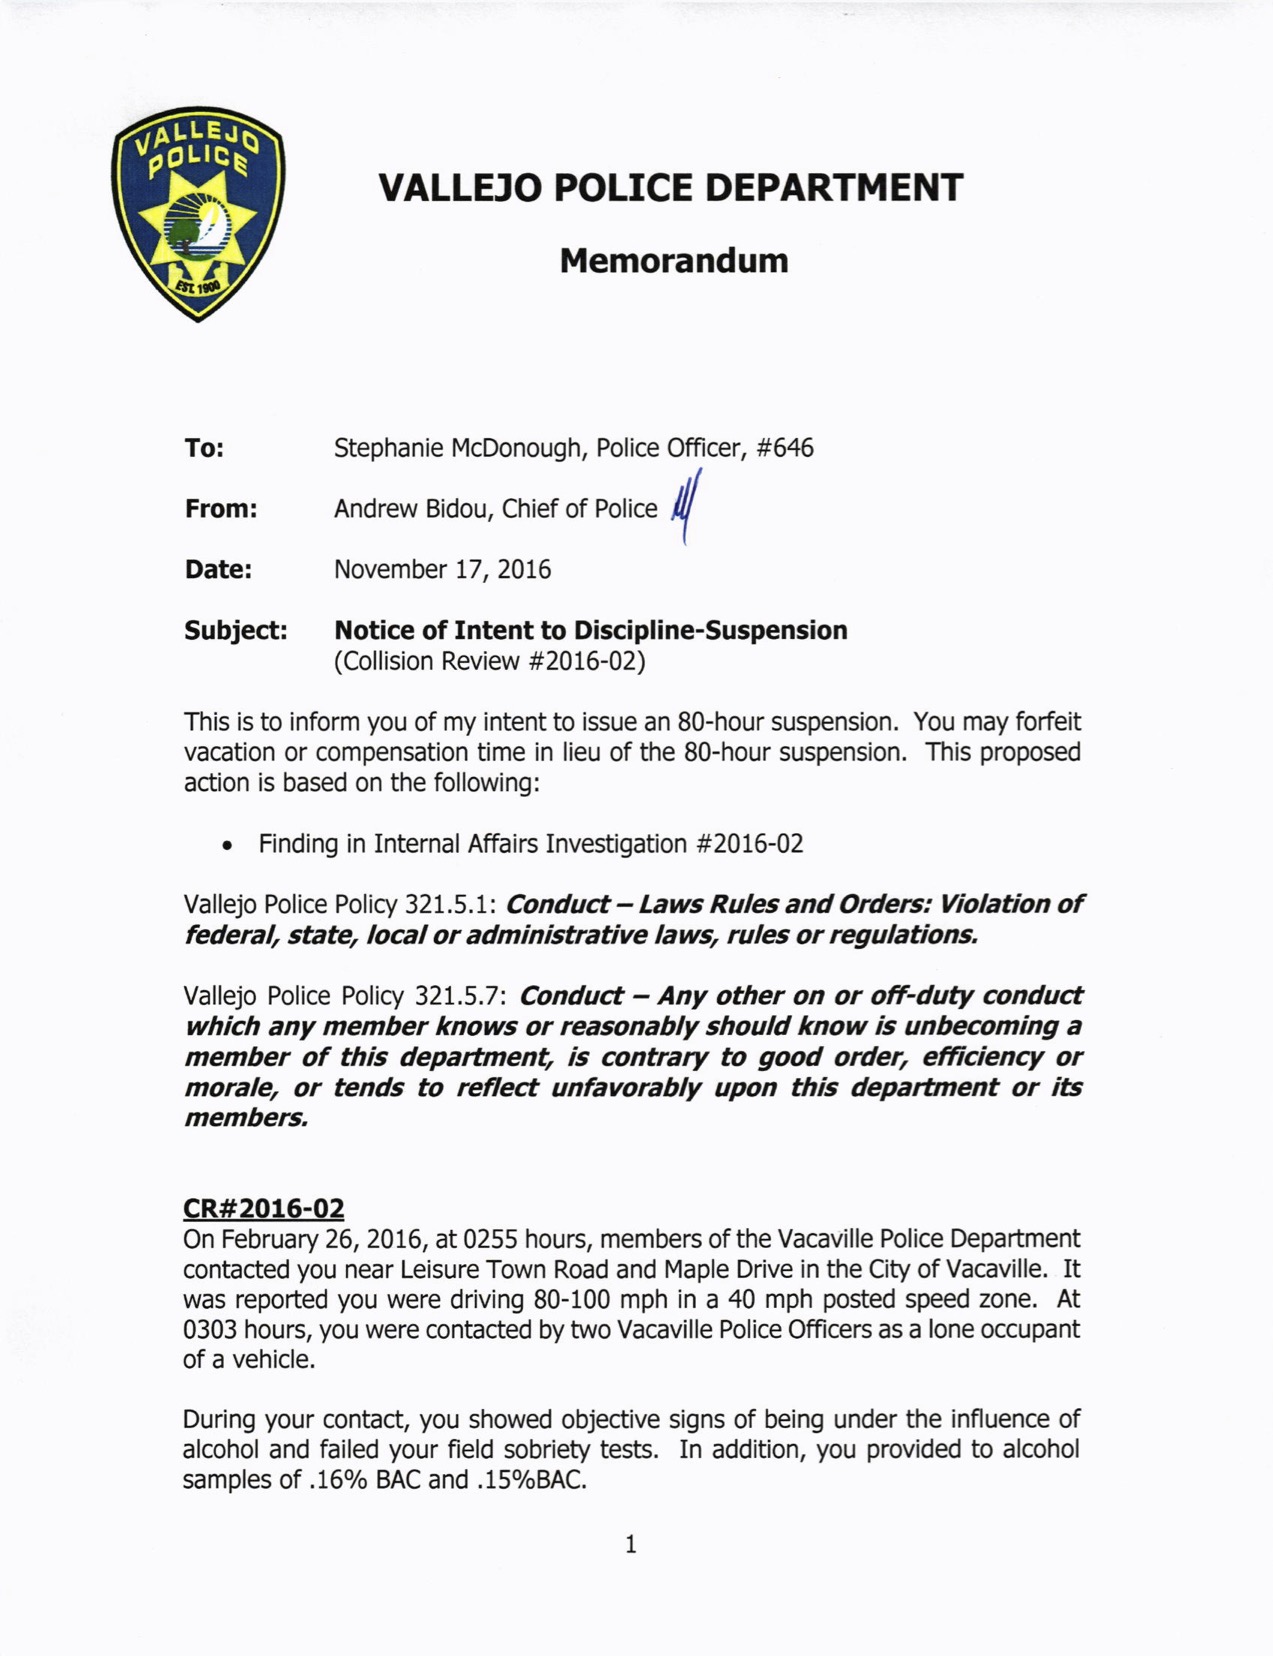 Image of a document titled "VALLEJO POLICE DEPARTMENT Memorandum," addressed to Officer Stephanie McDonough. It's a "Notice of Intent to Discipline-Suspension" signed by the Chief of Police, dated November 17, 2016, citing a violation of police policies. It reads: To: Stephanie McDonough, Police Officer, #646 From: Andrew Bidou, Chief of Police Date: November 17, 2016 Subject: Notice of Intent to Discipline-Suspension (Collision Review #2016-02) This is to inform you of my intent to issue an 80-hour suspension. You may forfeit vacation or compensation time in lieu of the 80-hour suspension. This proposed action is based on the following: . Vallejo Police Policy 321.5.1: Conduct- Laws Rules and Orderc: Violation of federal, state, local or administrative laws, rules or regulations, Vallejo Police Poliry 321.5.7: Conduct - Any other on or off-duty conduct which any member knows or reasonably should know is unbecoming a member of this depatflnent, is contrary to good order, efftciency or morale, or tends to reflect unfavorably upon this department or ib members, cR#2015-02 On February 26,2016, at 0255 hours, members of the Vacaville Police Department contacted you near Leisure Town Road and Maple Drive in the City of Vacaville. It was reported you were driving 80-100 mph in a 40 mph posted speed zone. At 0303 hours, you were contacted by wvo Vacaville Police Officers as a lone occupant of a vehicle. During your contact, you showed objective signs of being under the influence of alcohol and failed your field sobriety tests. In addition, you provided to alcohol samples of .16% BAC and .15% BAC.